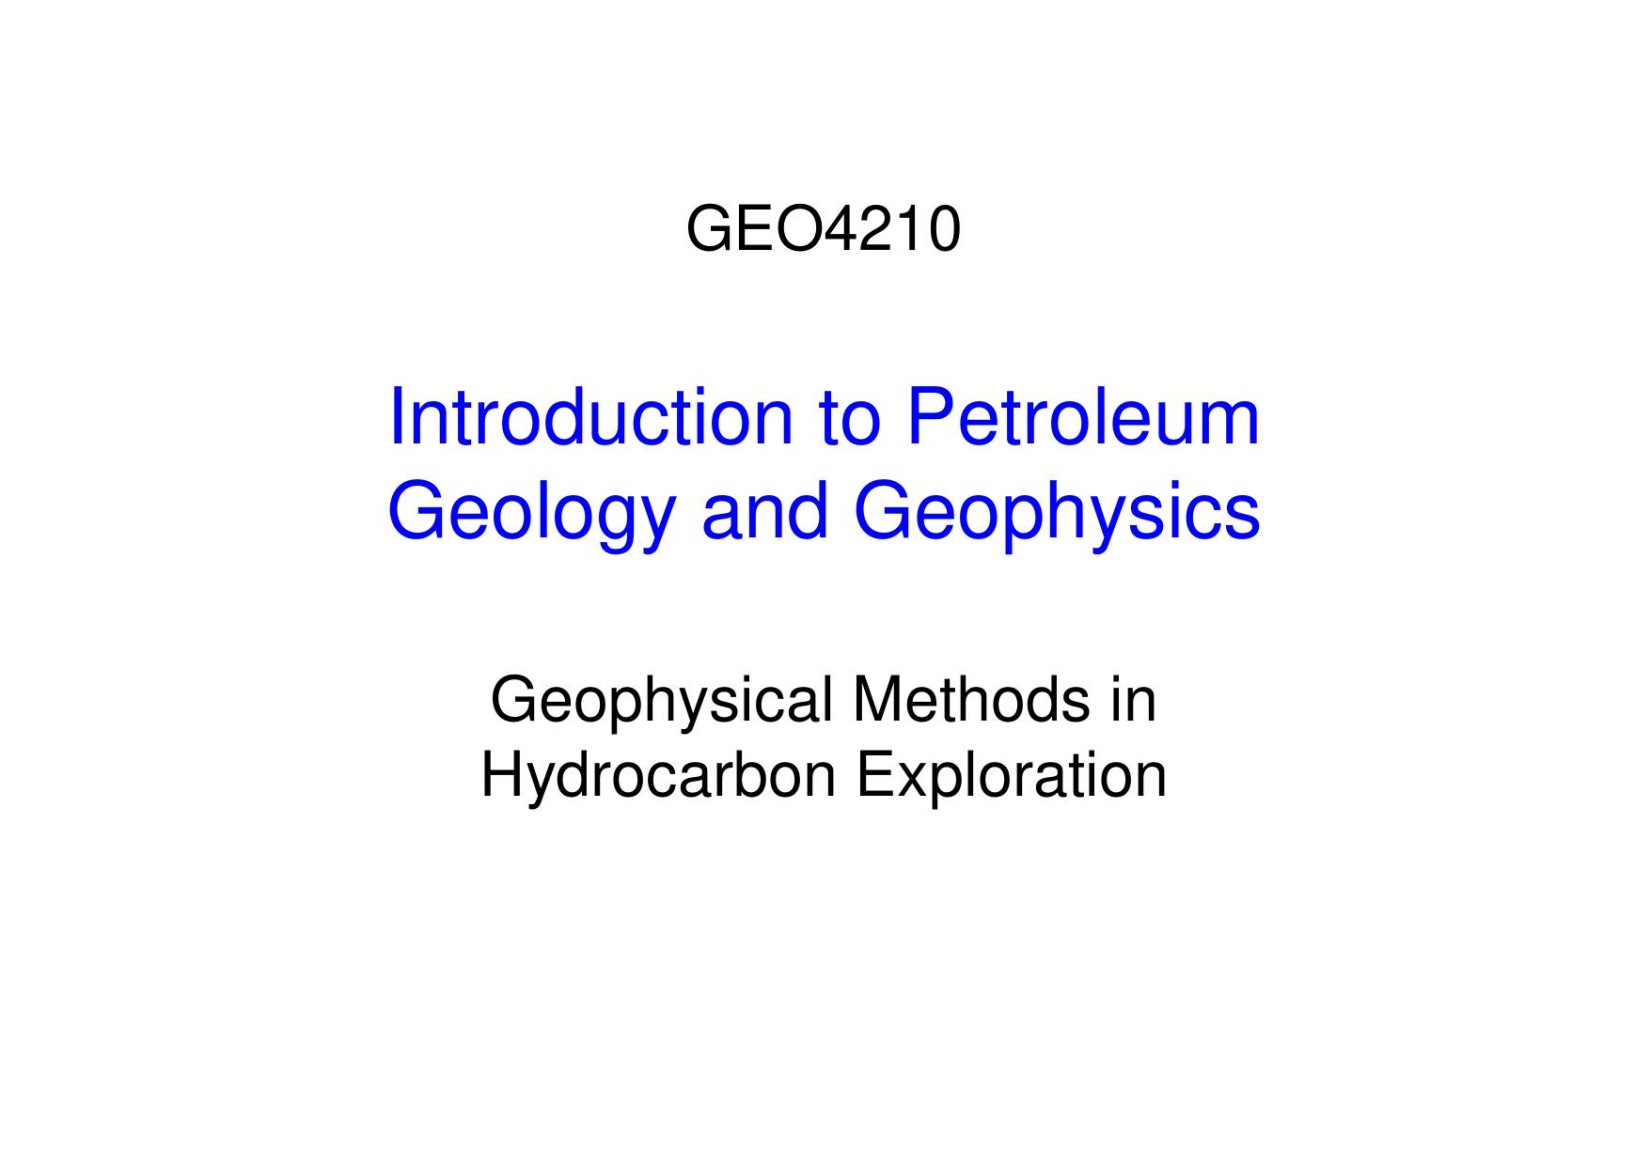 Microsoft PowerPoint - Introduction to Petroleum Geology and Geophysics.ppt